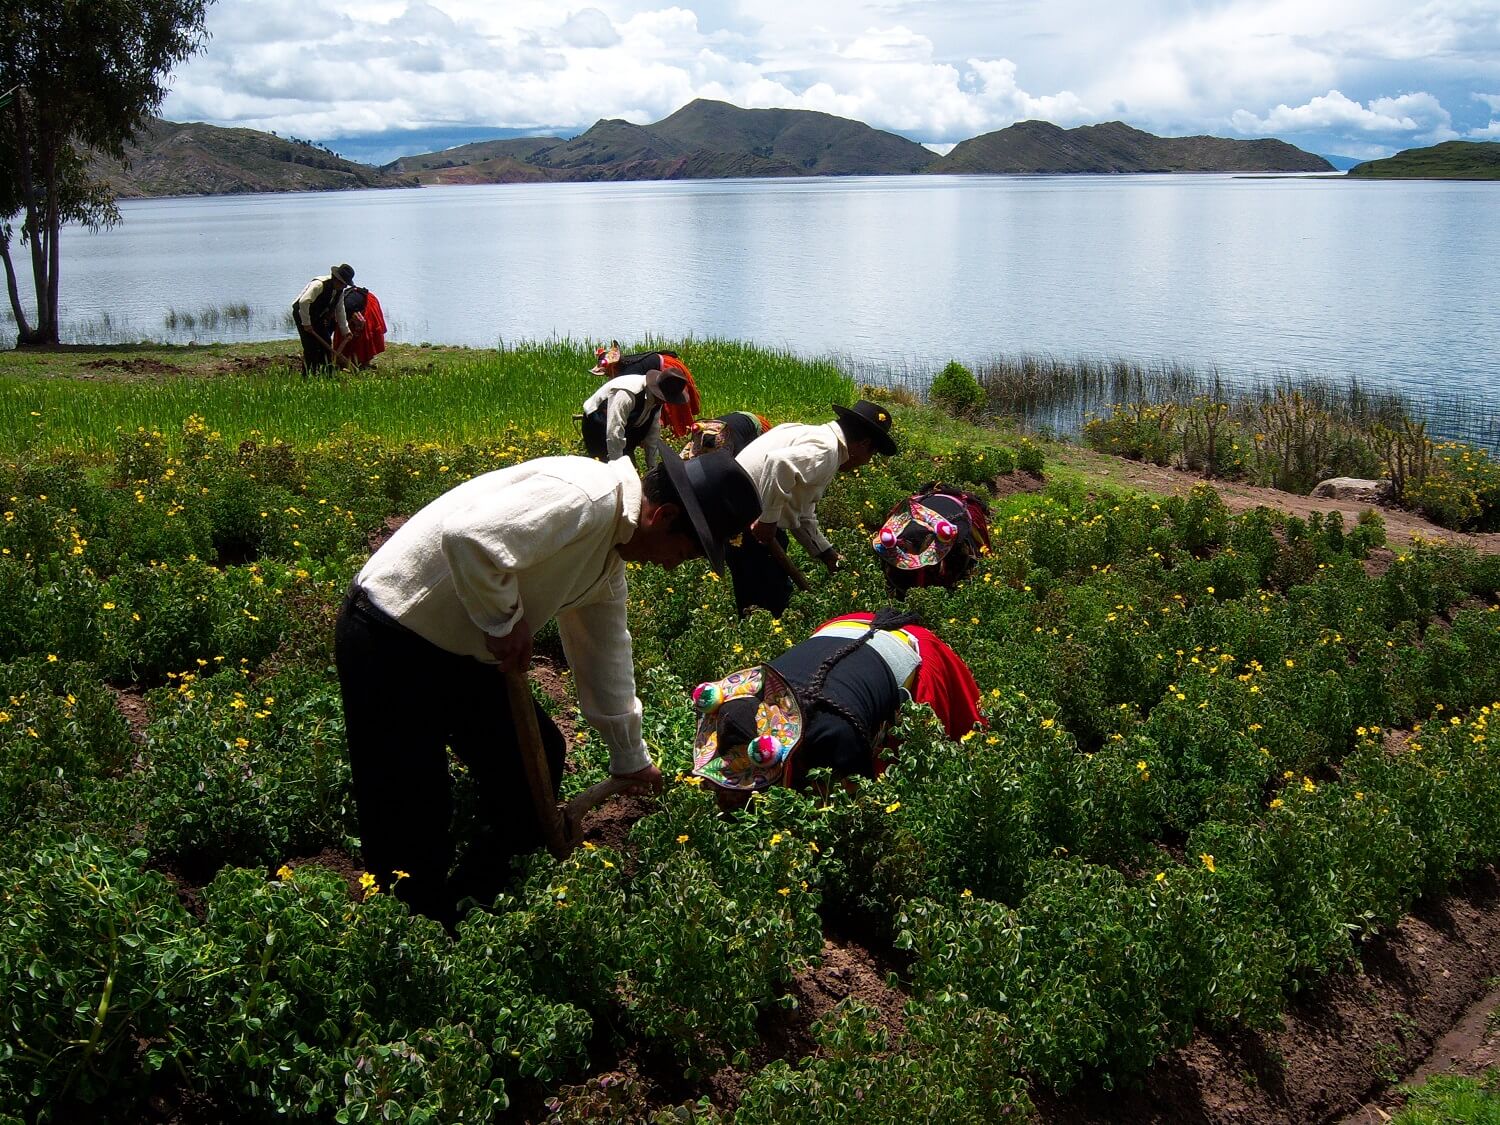 11Couples in traditional clothes working together on their potatoe fields at the shores of Capachica peninsula in Lake Titicaca. | RESPONSible Travel Peru